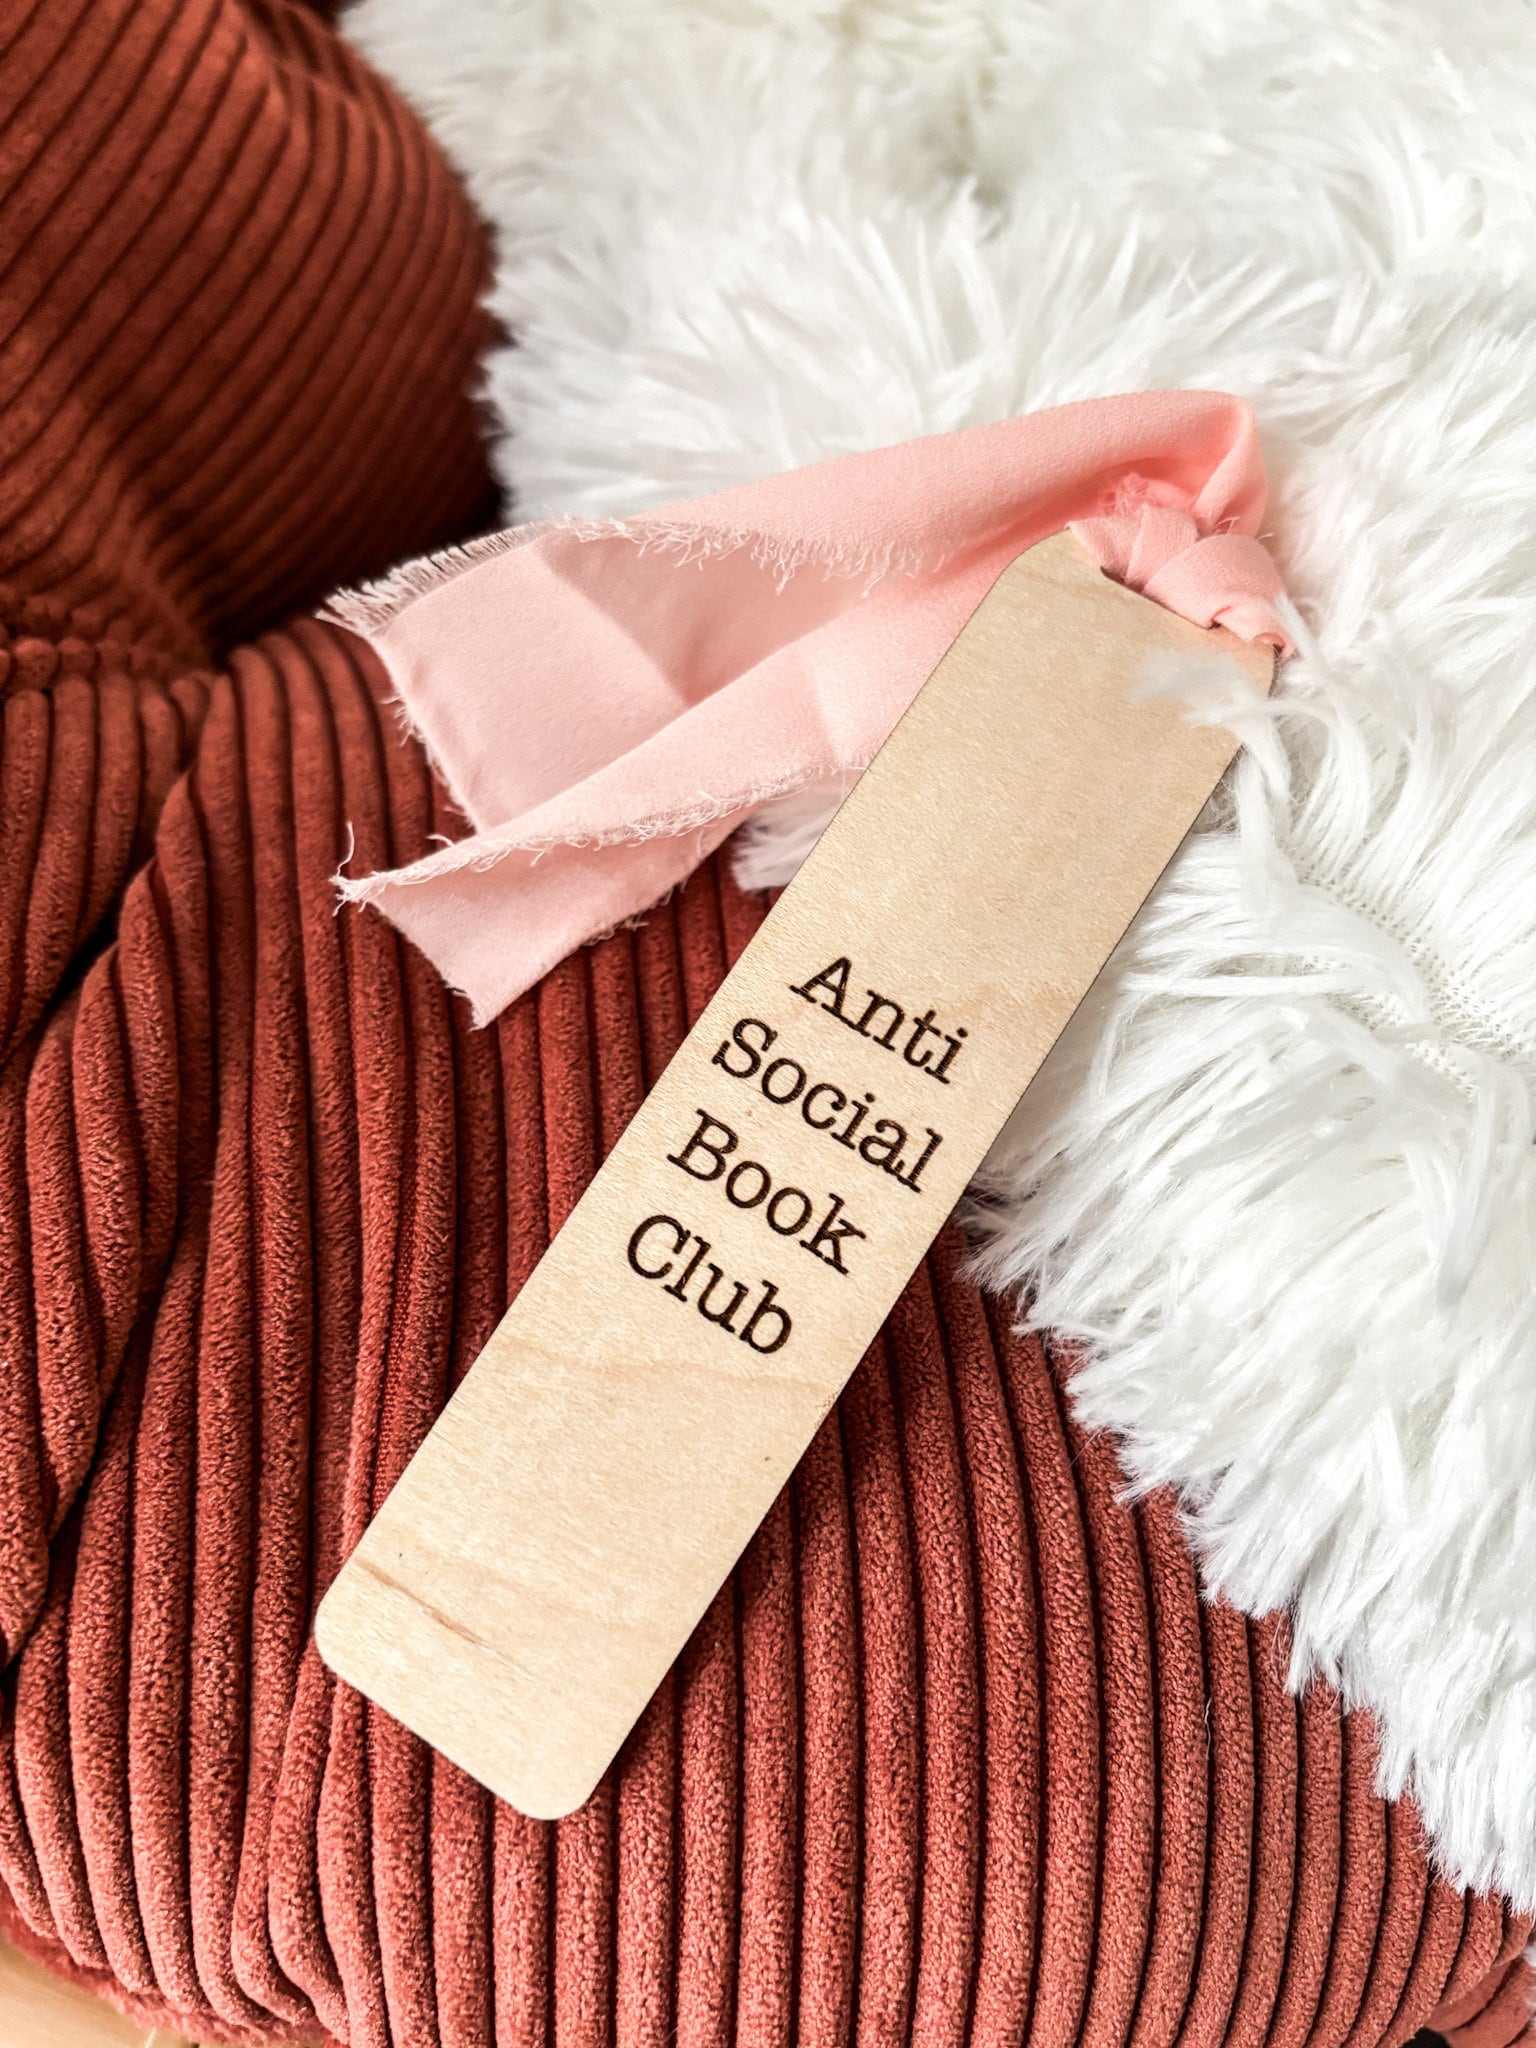 Anti Social Book Club Wood Bookmark, Acrylic Bookmark, Funny Bookmark Gift, Laser Engraved Bookmark, Aesthetic Acrylic Floral Bookmark